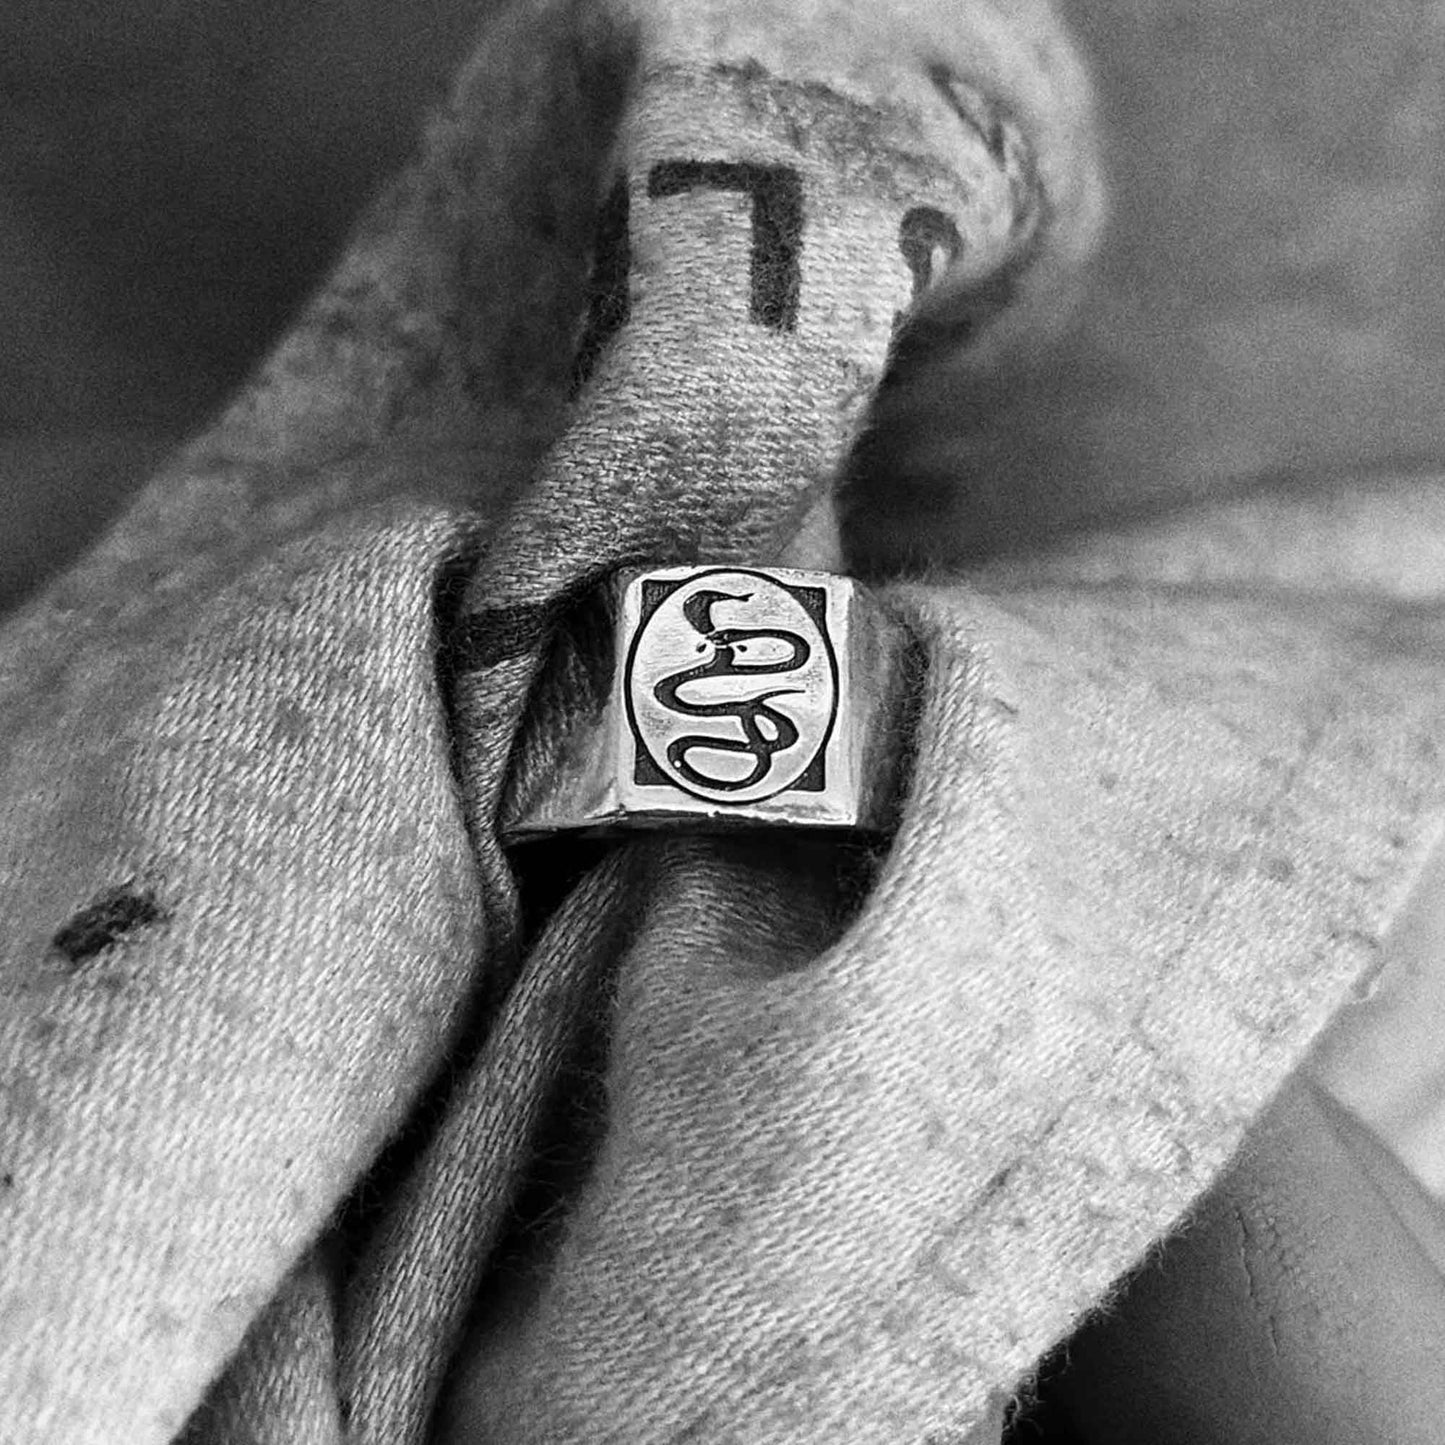 Double Headed Snake Signet Ring In 925 Sterling Silver